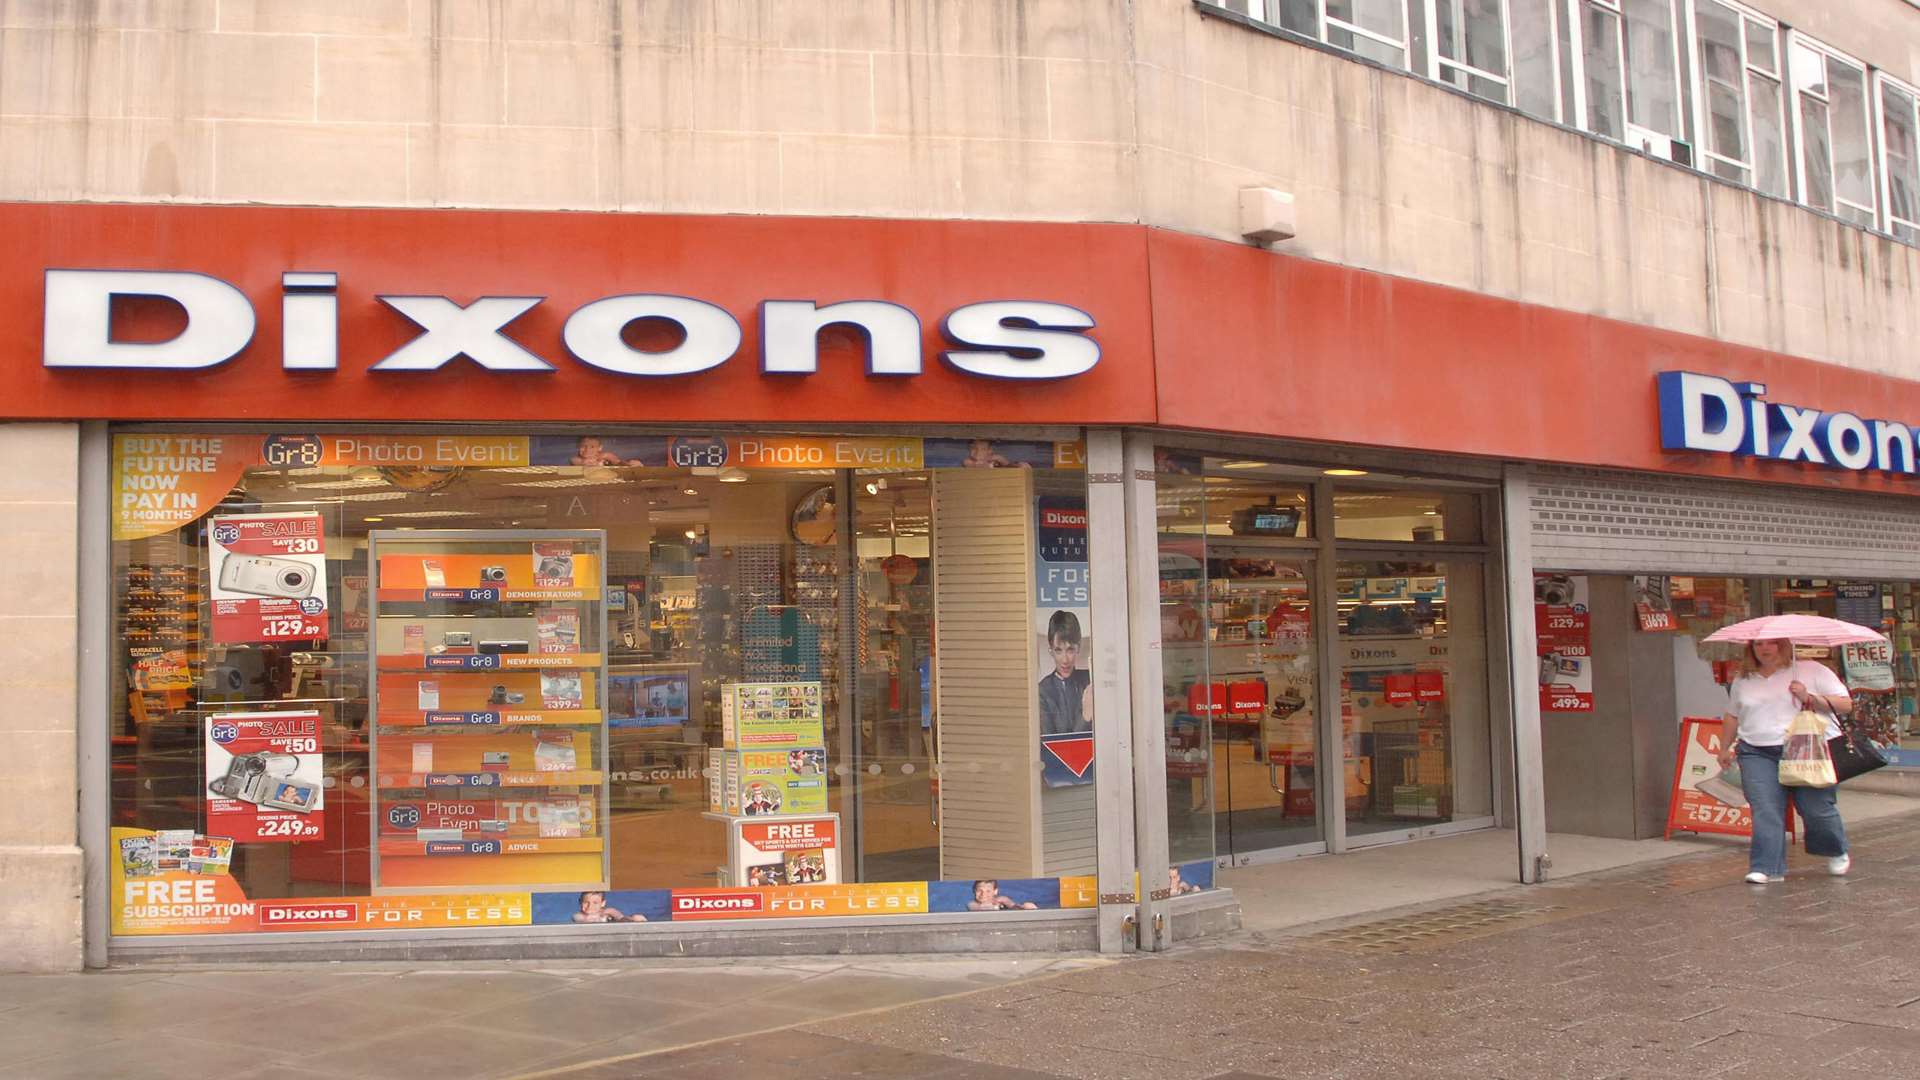 Dixons stores in the likes of Chatham, Canterbury, Maidstone and Orpington are long gone